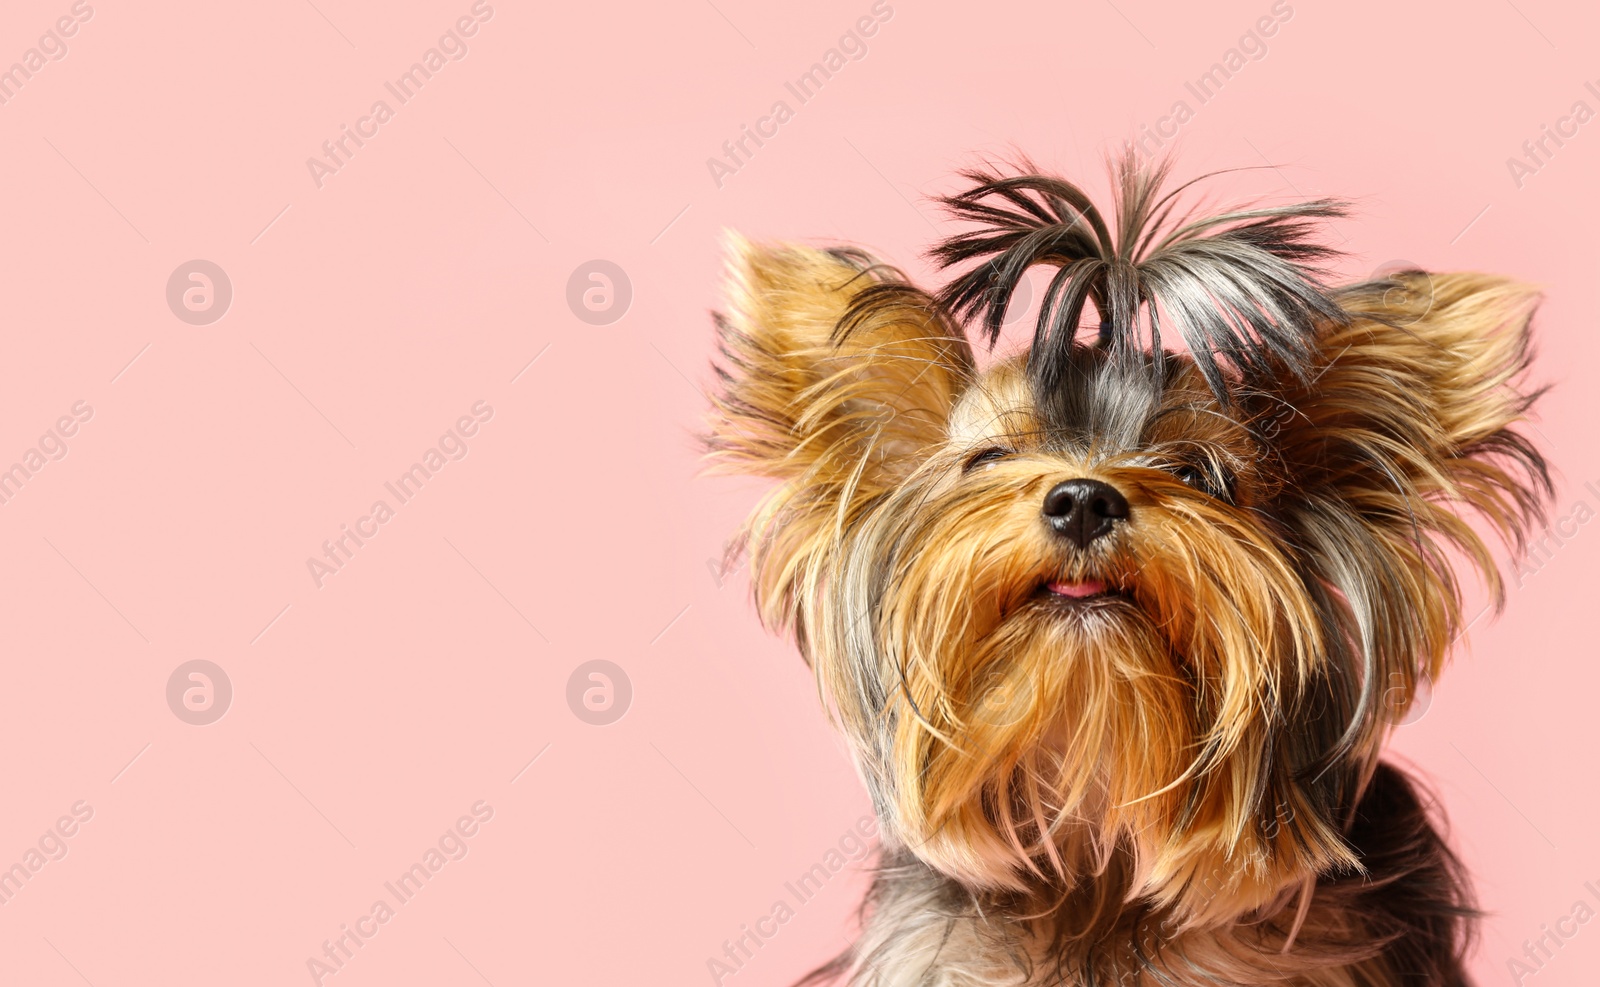 Photo of Adorable Yorkshire terrier on pink background, space for text. Cute dog